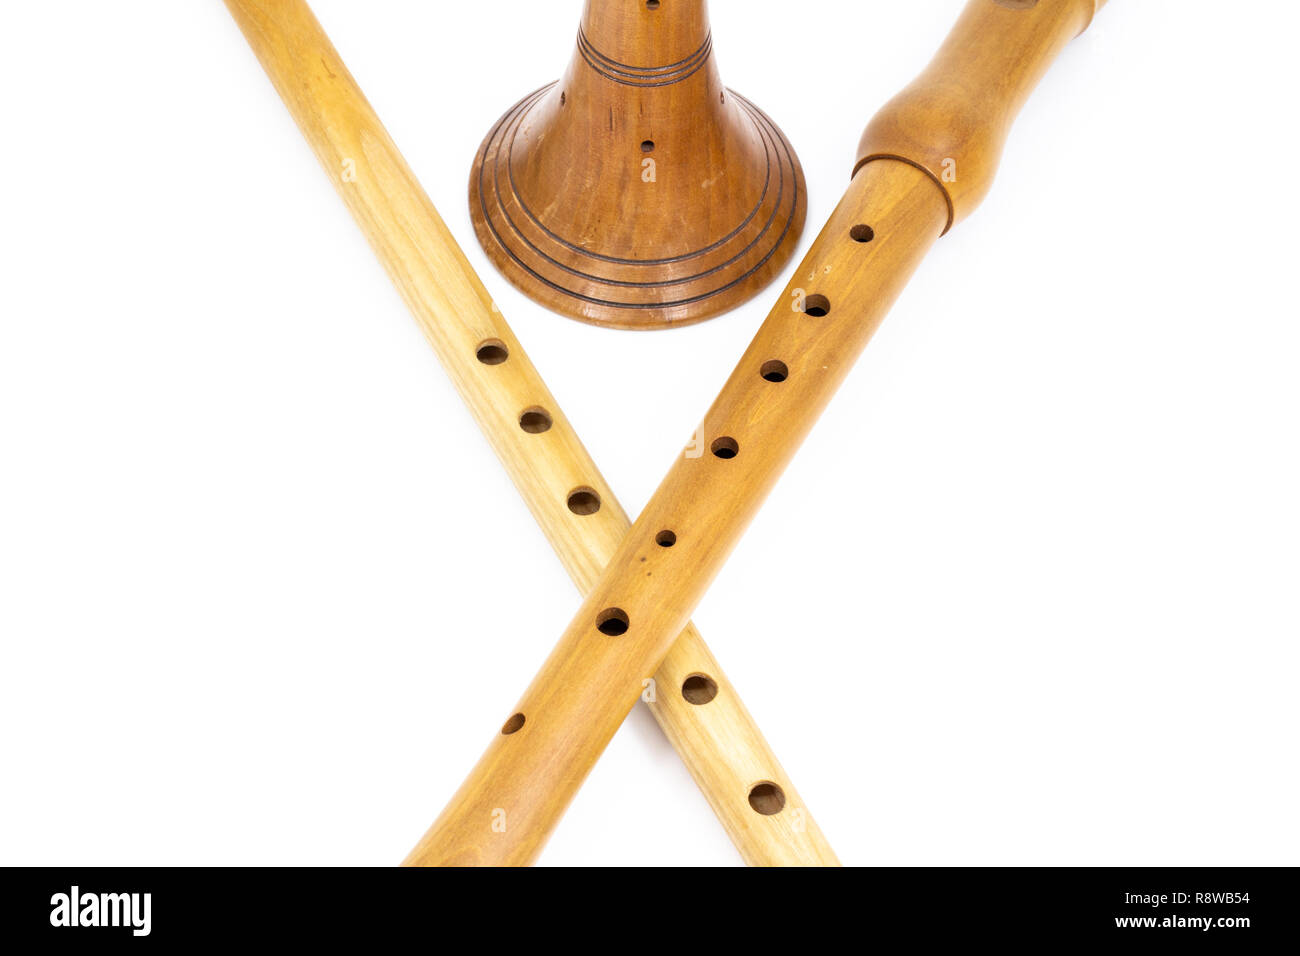 Three woodwinds together - hungarian six-hole fute, baroque recorder,  zurna, isolated on white Stock Photo - Alamy